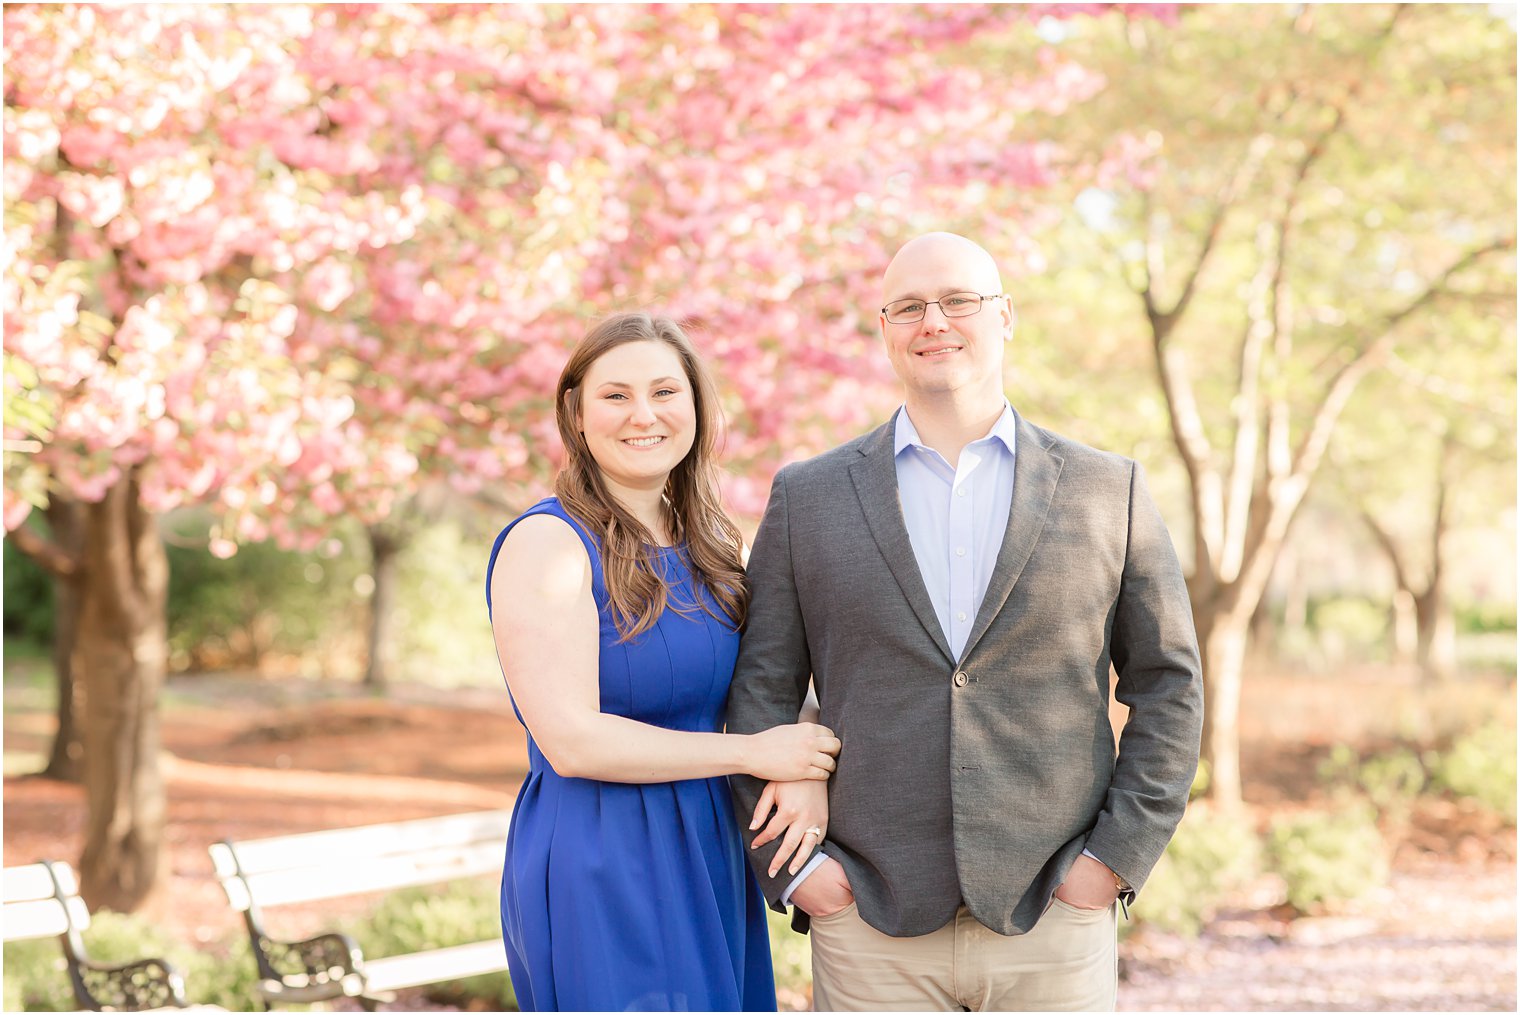 Posed engagement photo at Branch Brook Park